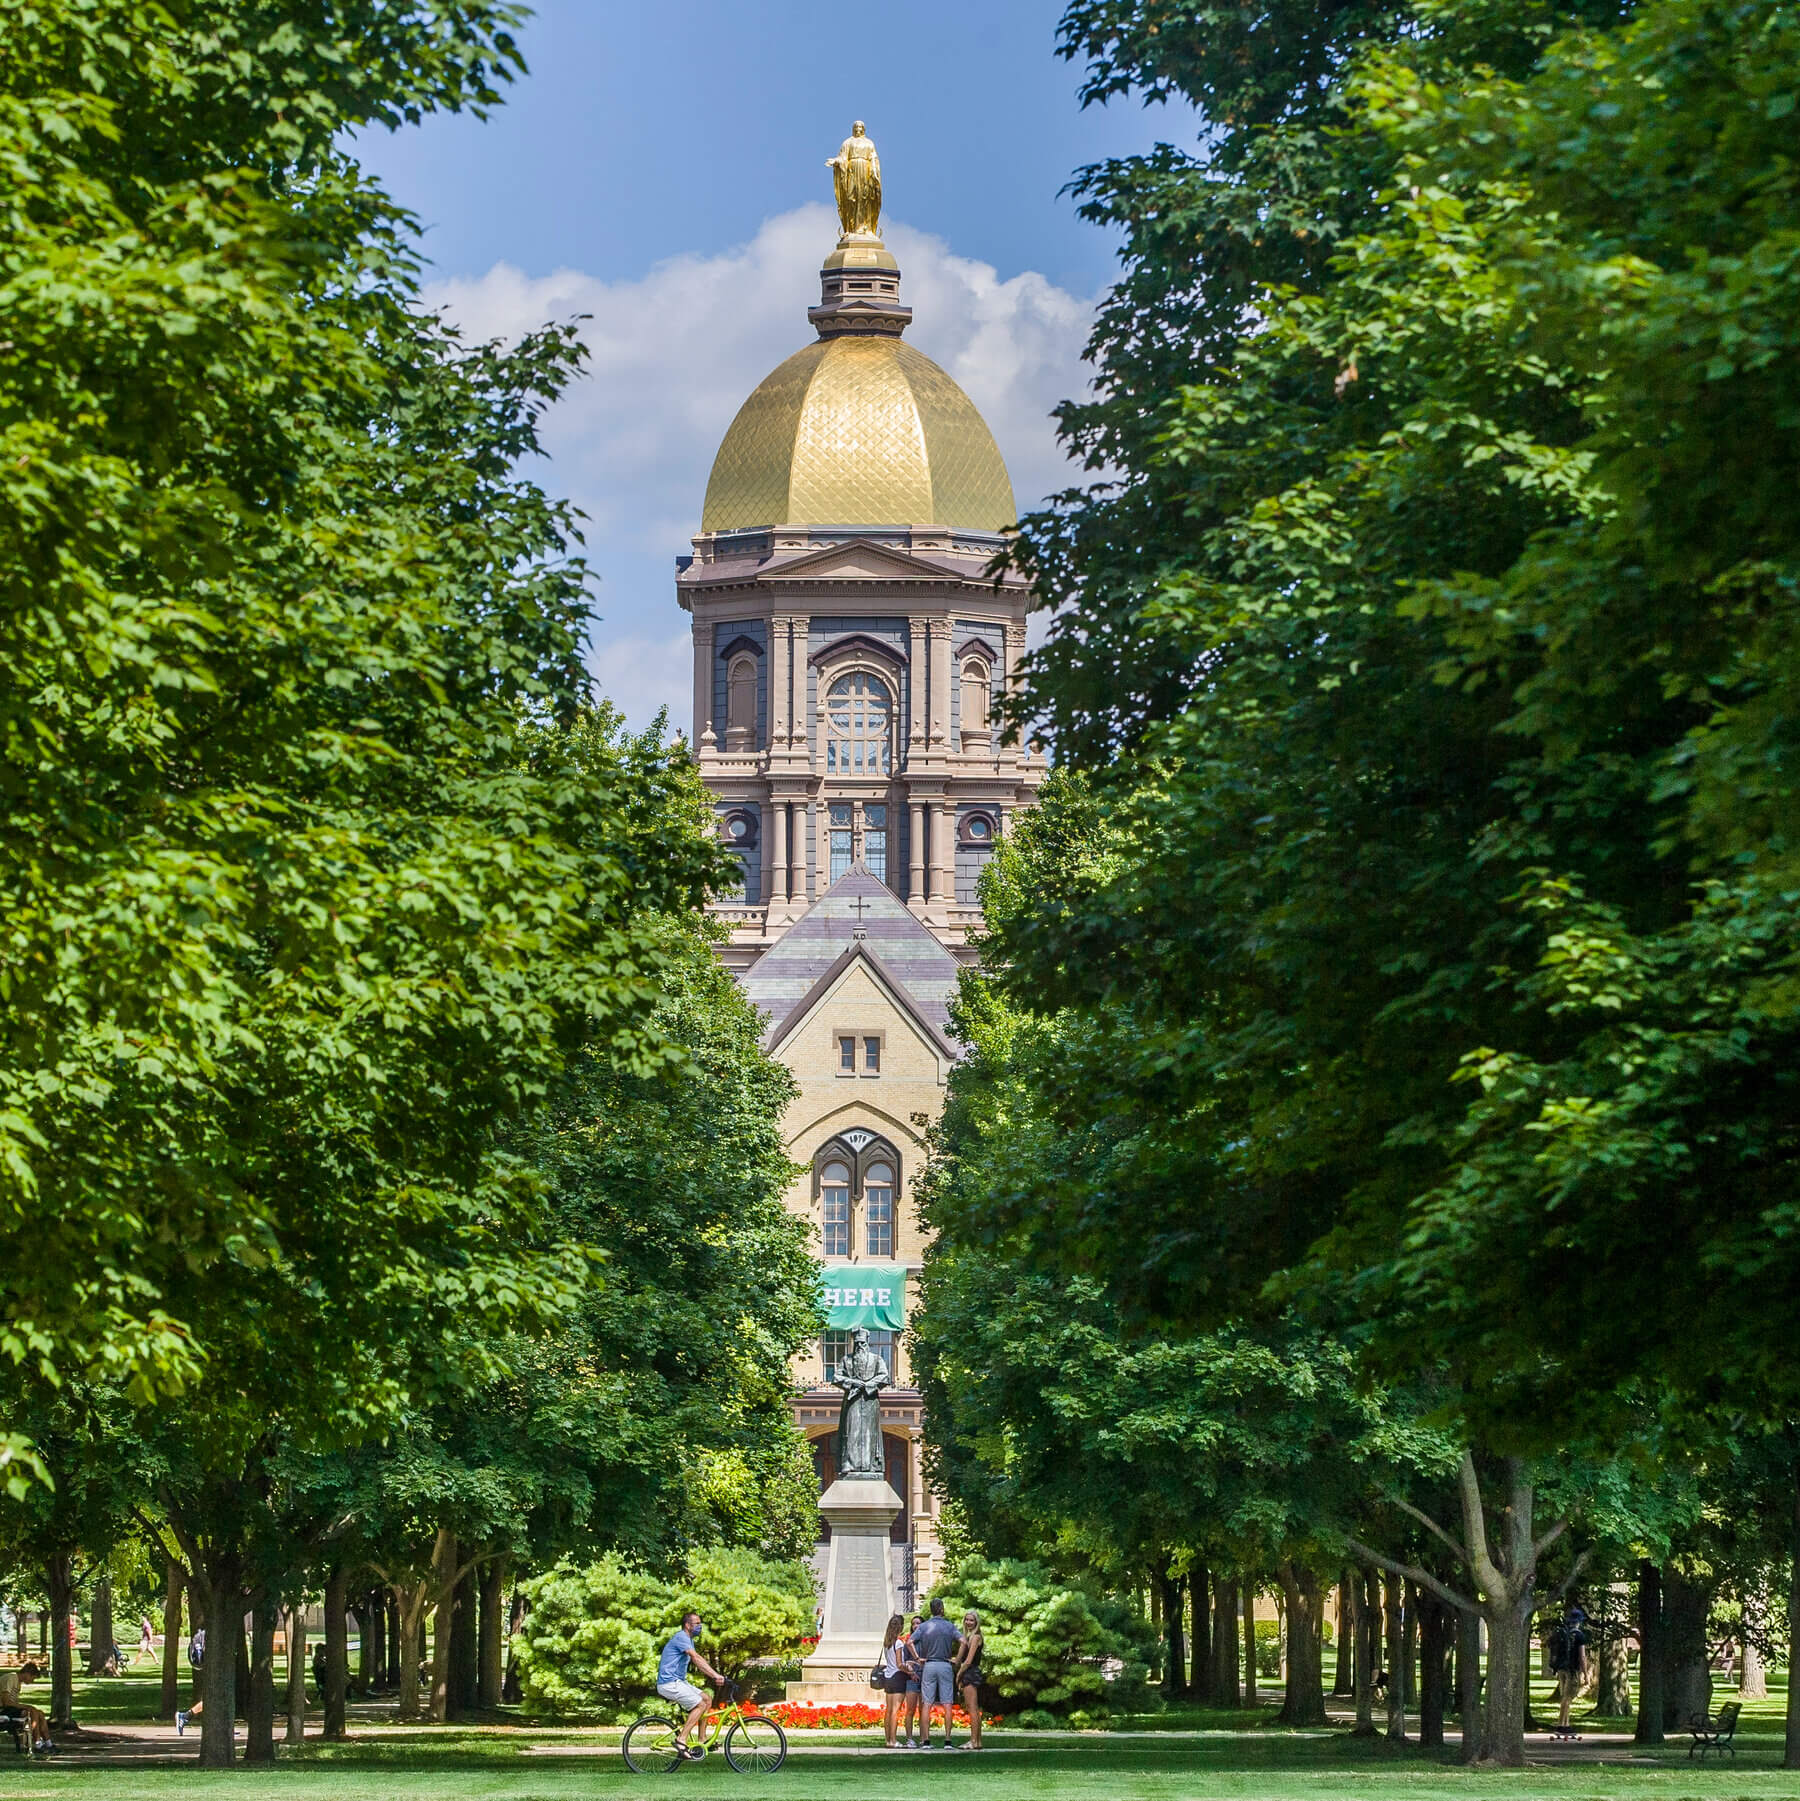 Notre Dame Moving Classes Online for at Least Two Weeks